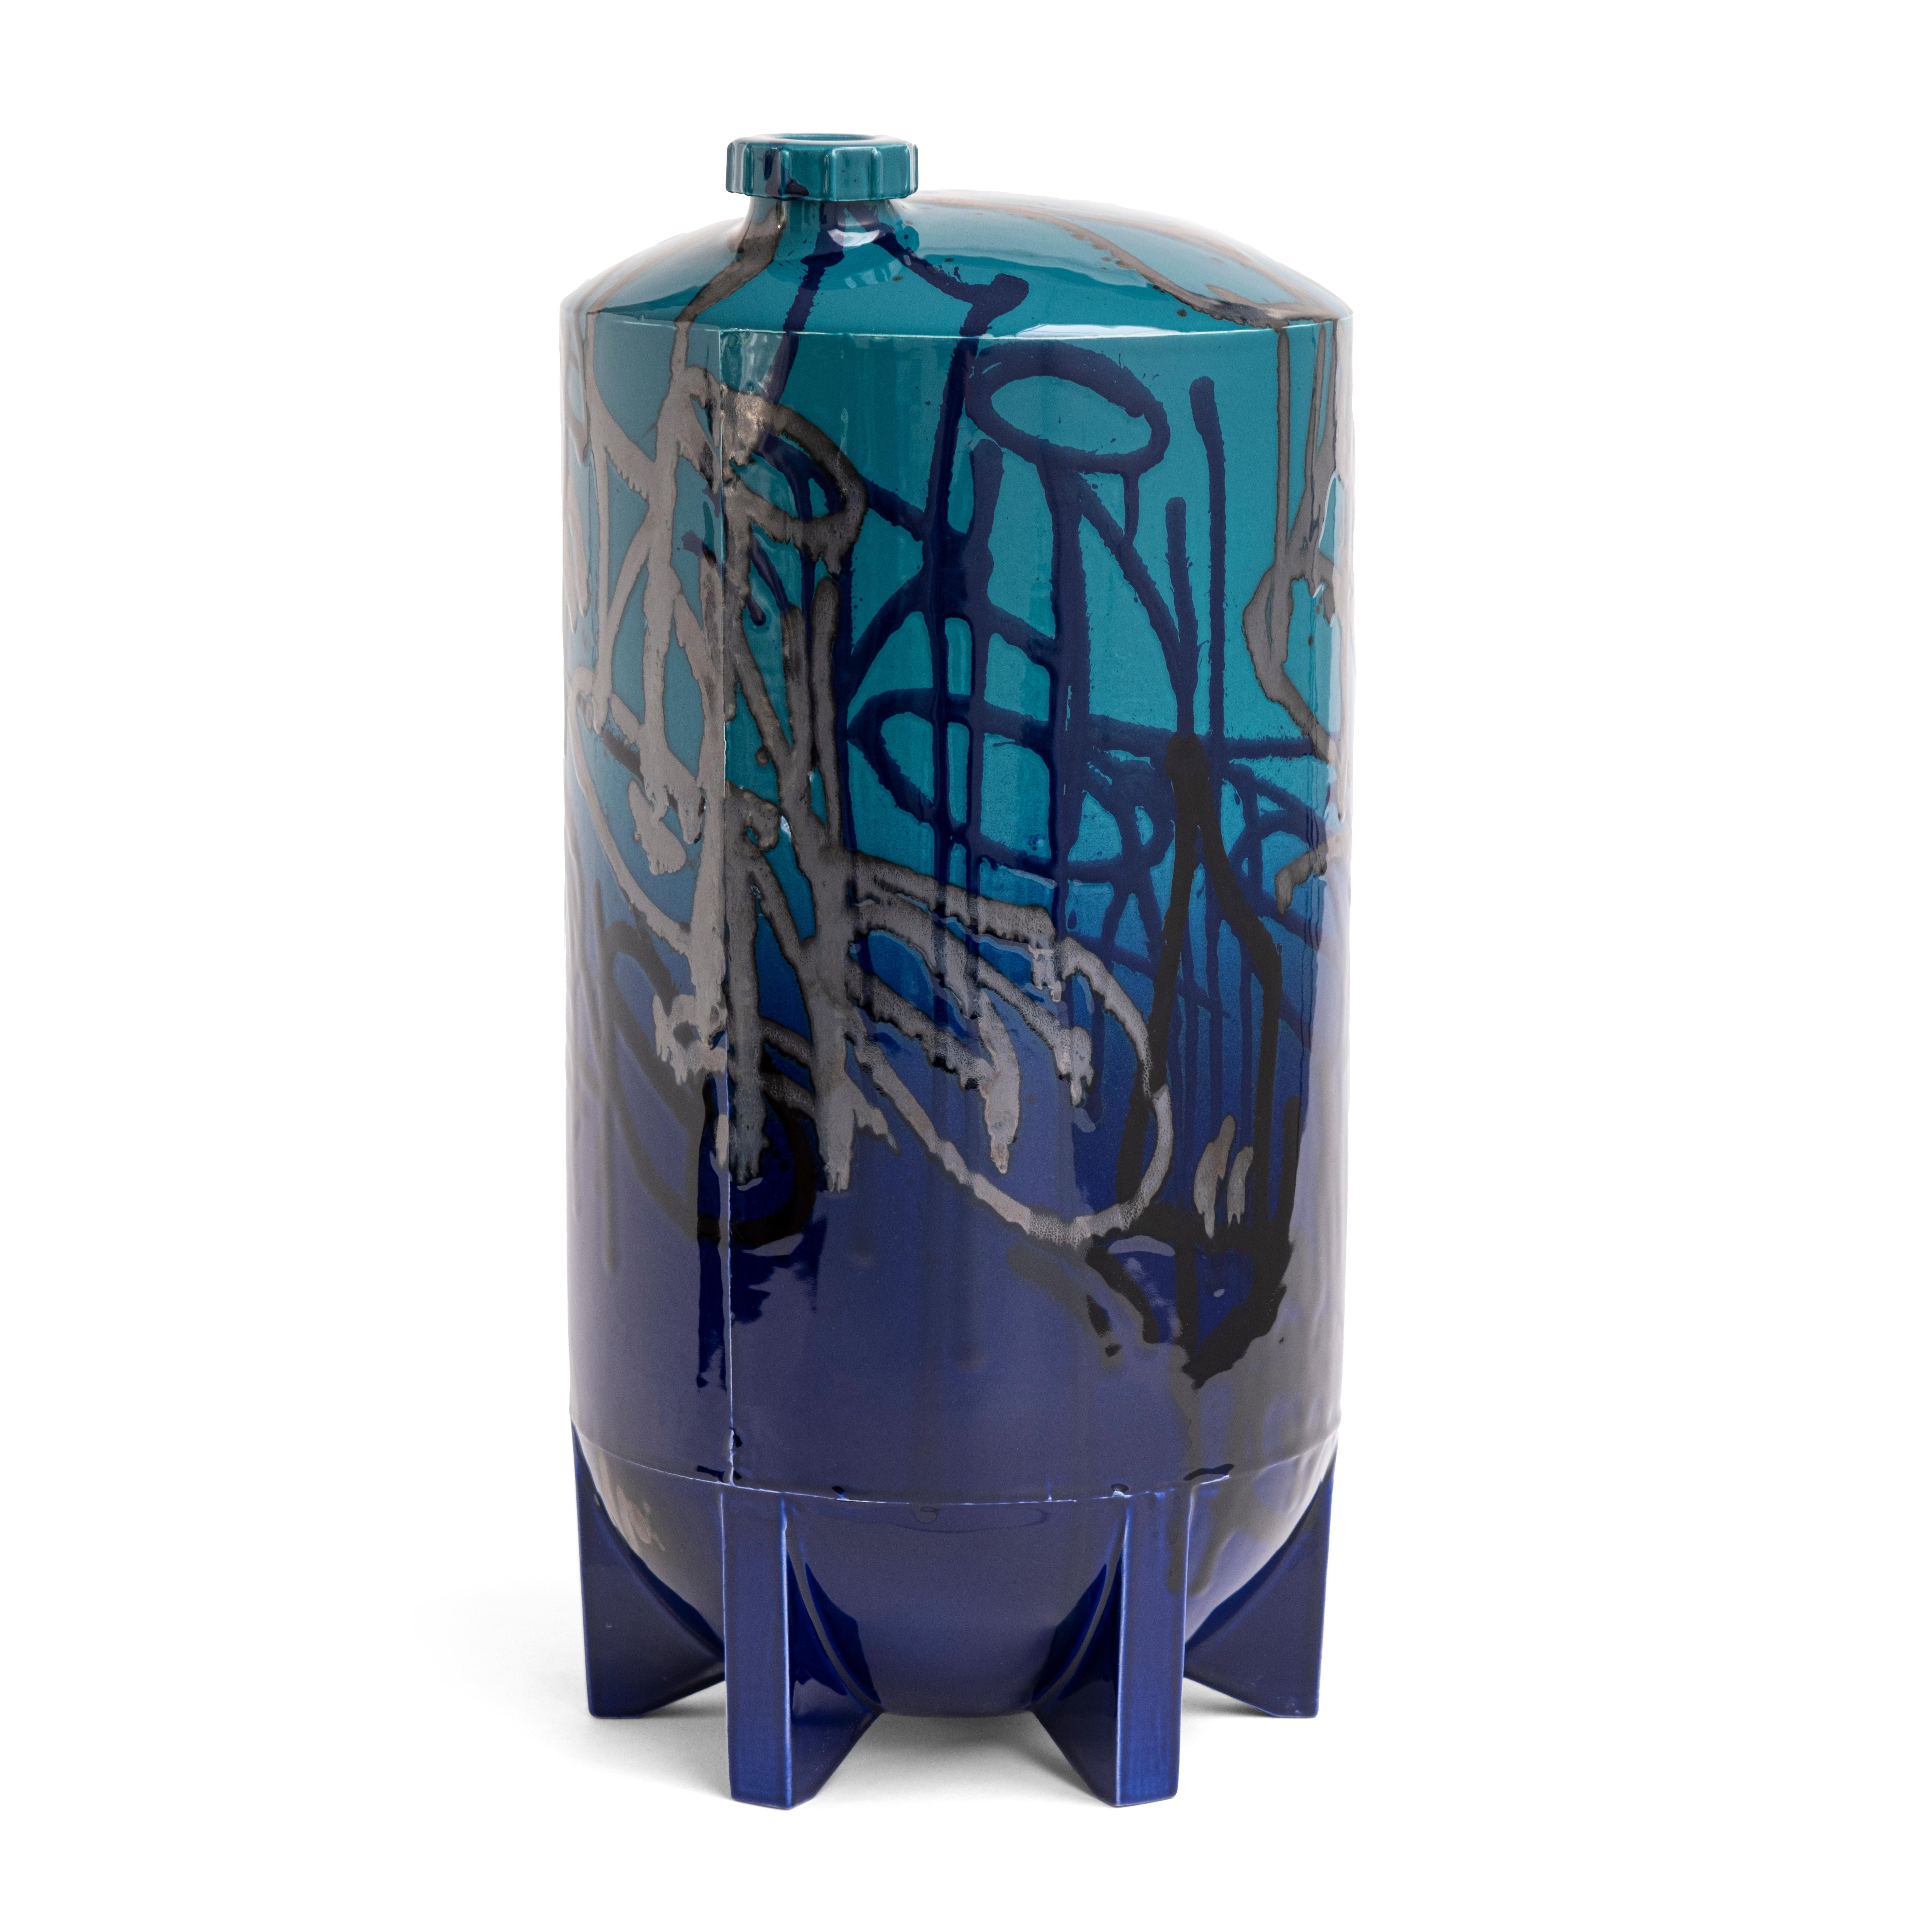 Under Pressure 6 by Yuri van Poppel
Dimensions: D 27 x H 55 cm
One of a kind.
Earthenware, layered ceramic glazes, various colours.
Handmade and spray-painted by hand by SunkOne. Removable lid.

Everlasting graffiti spray-painted with ceramic